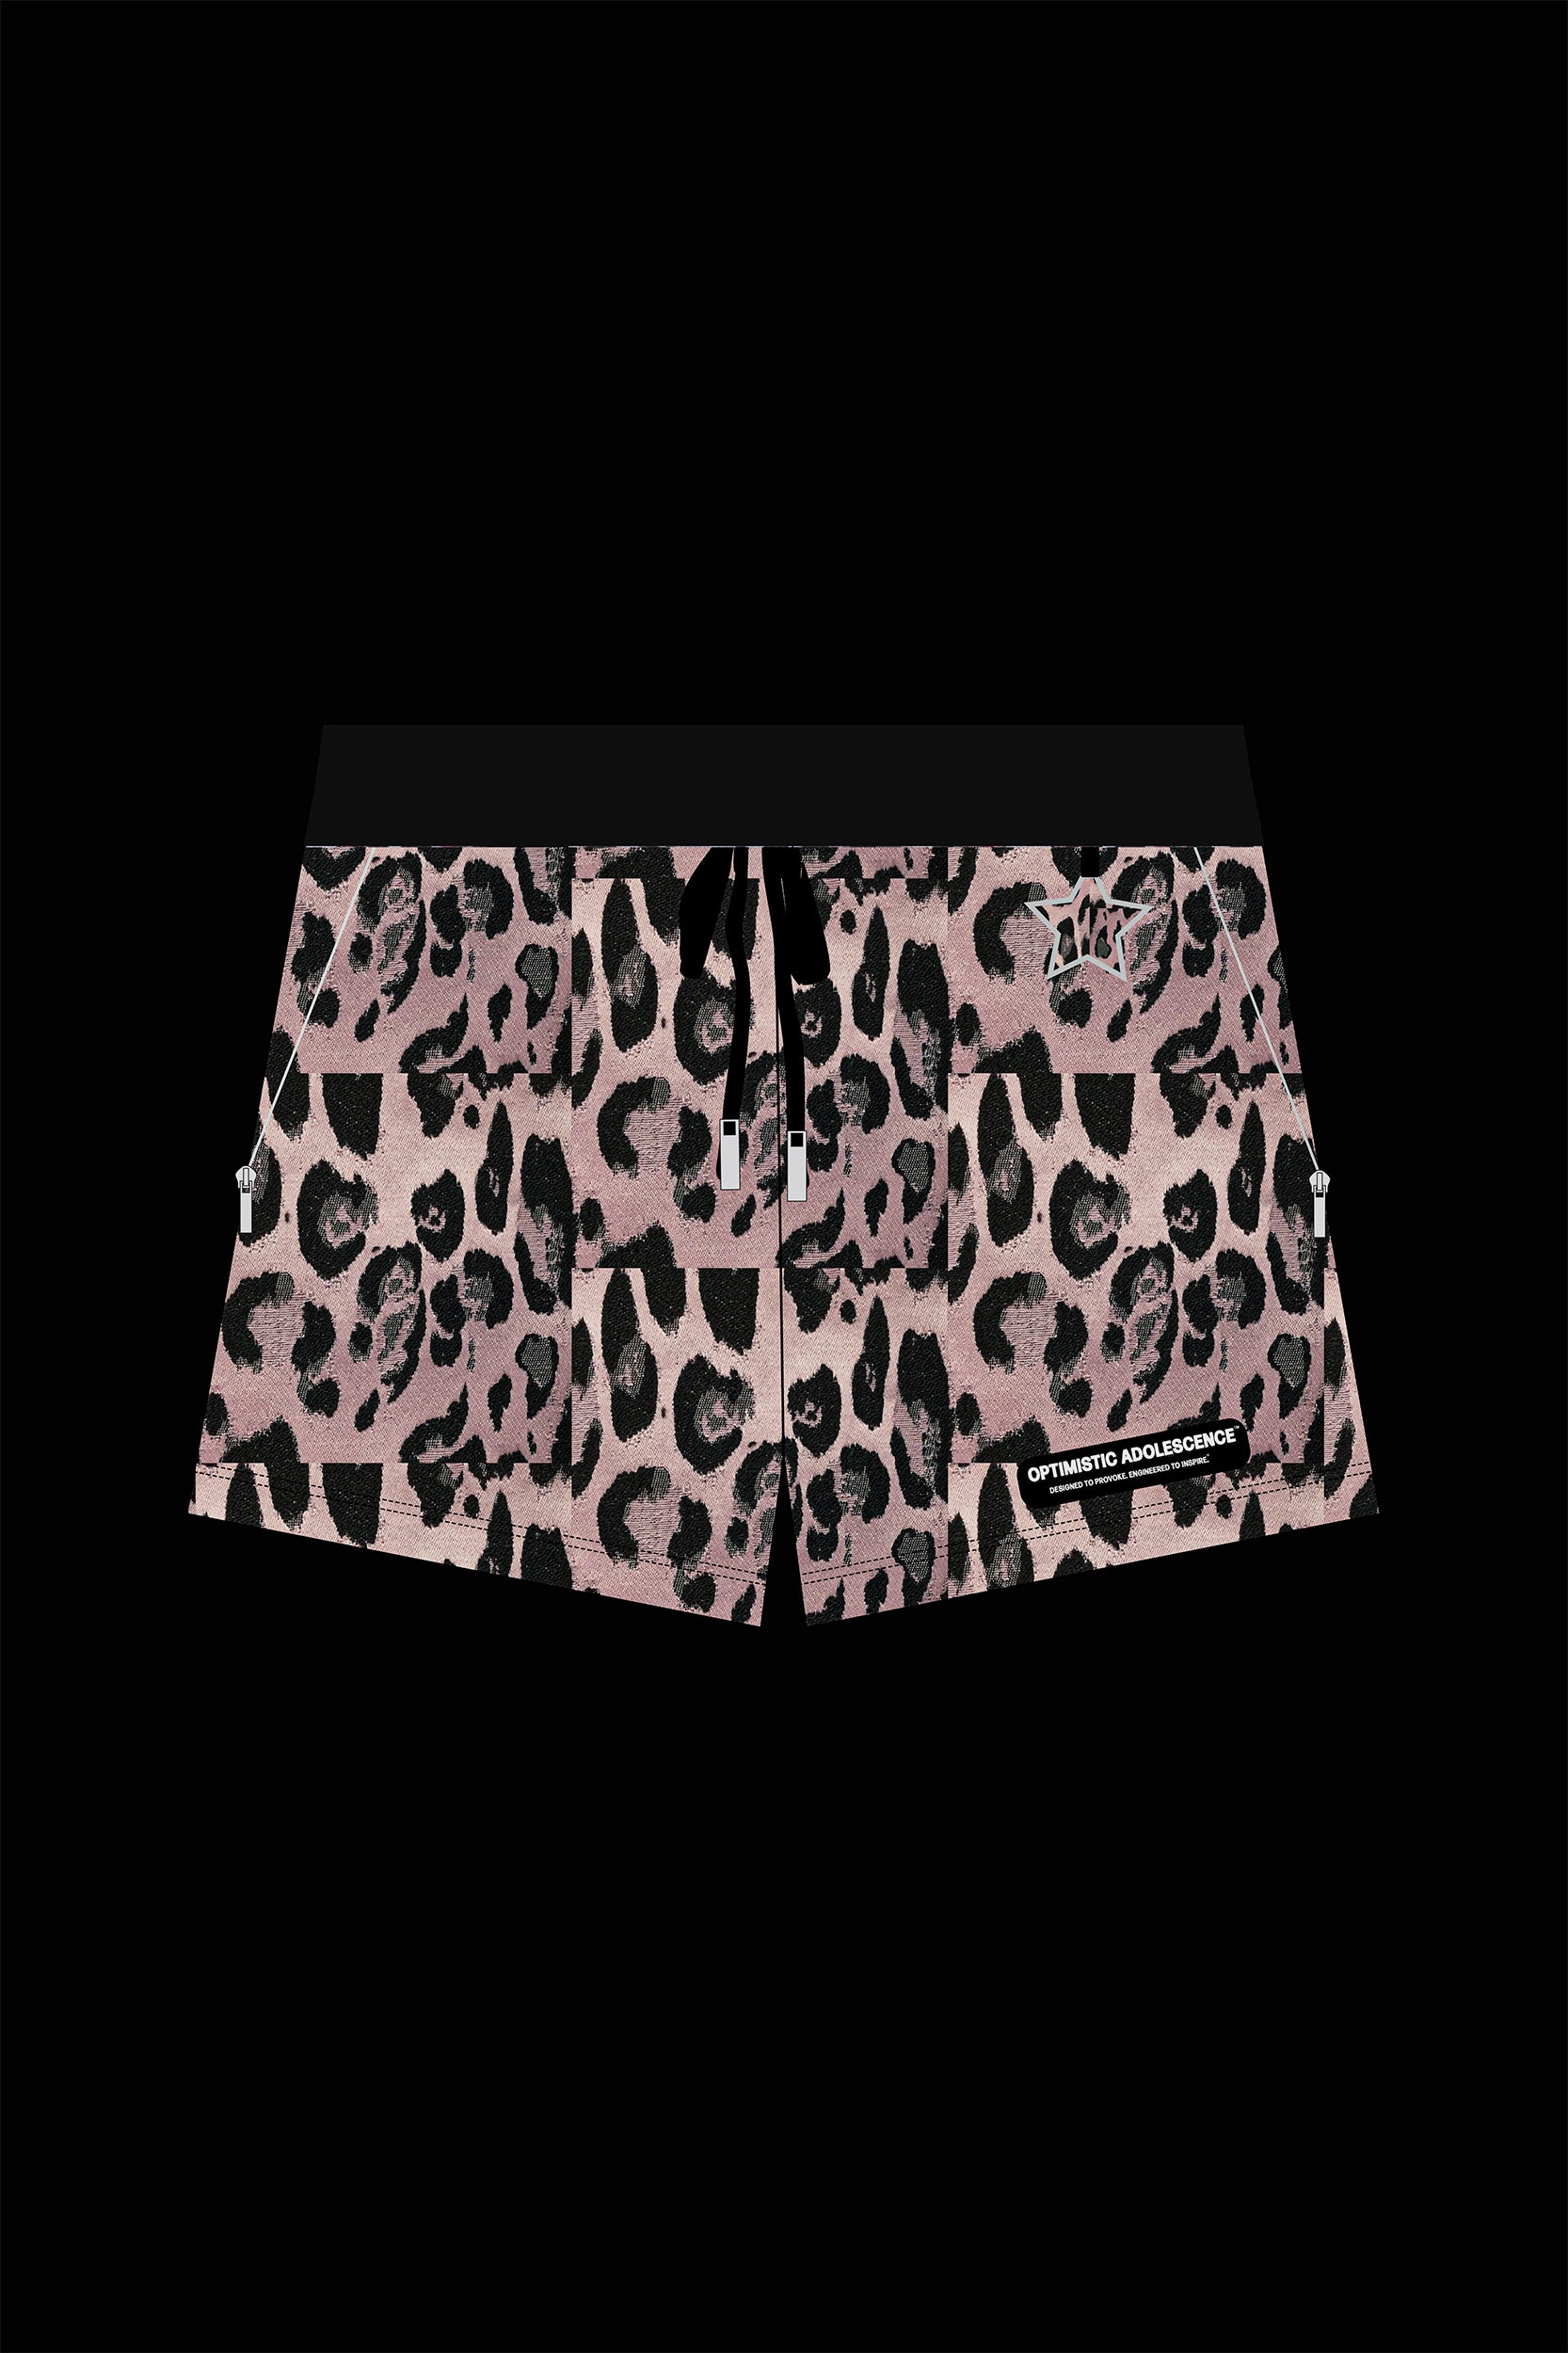 The Leopard Jacquard Drawstring Shorts in Pink